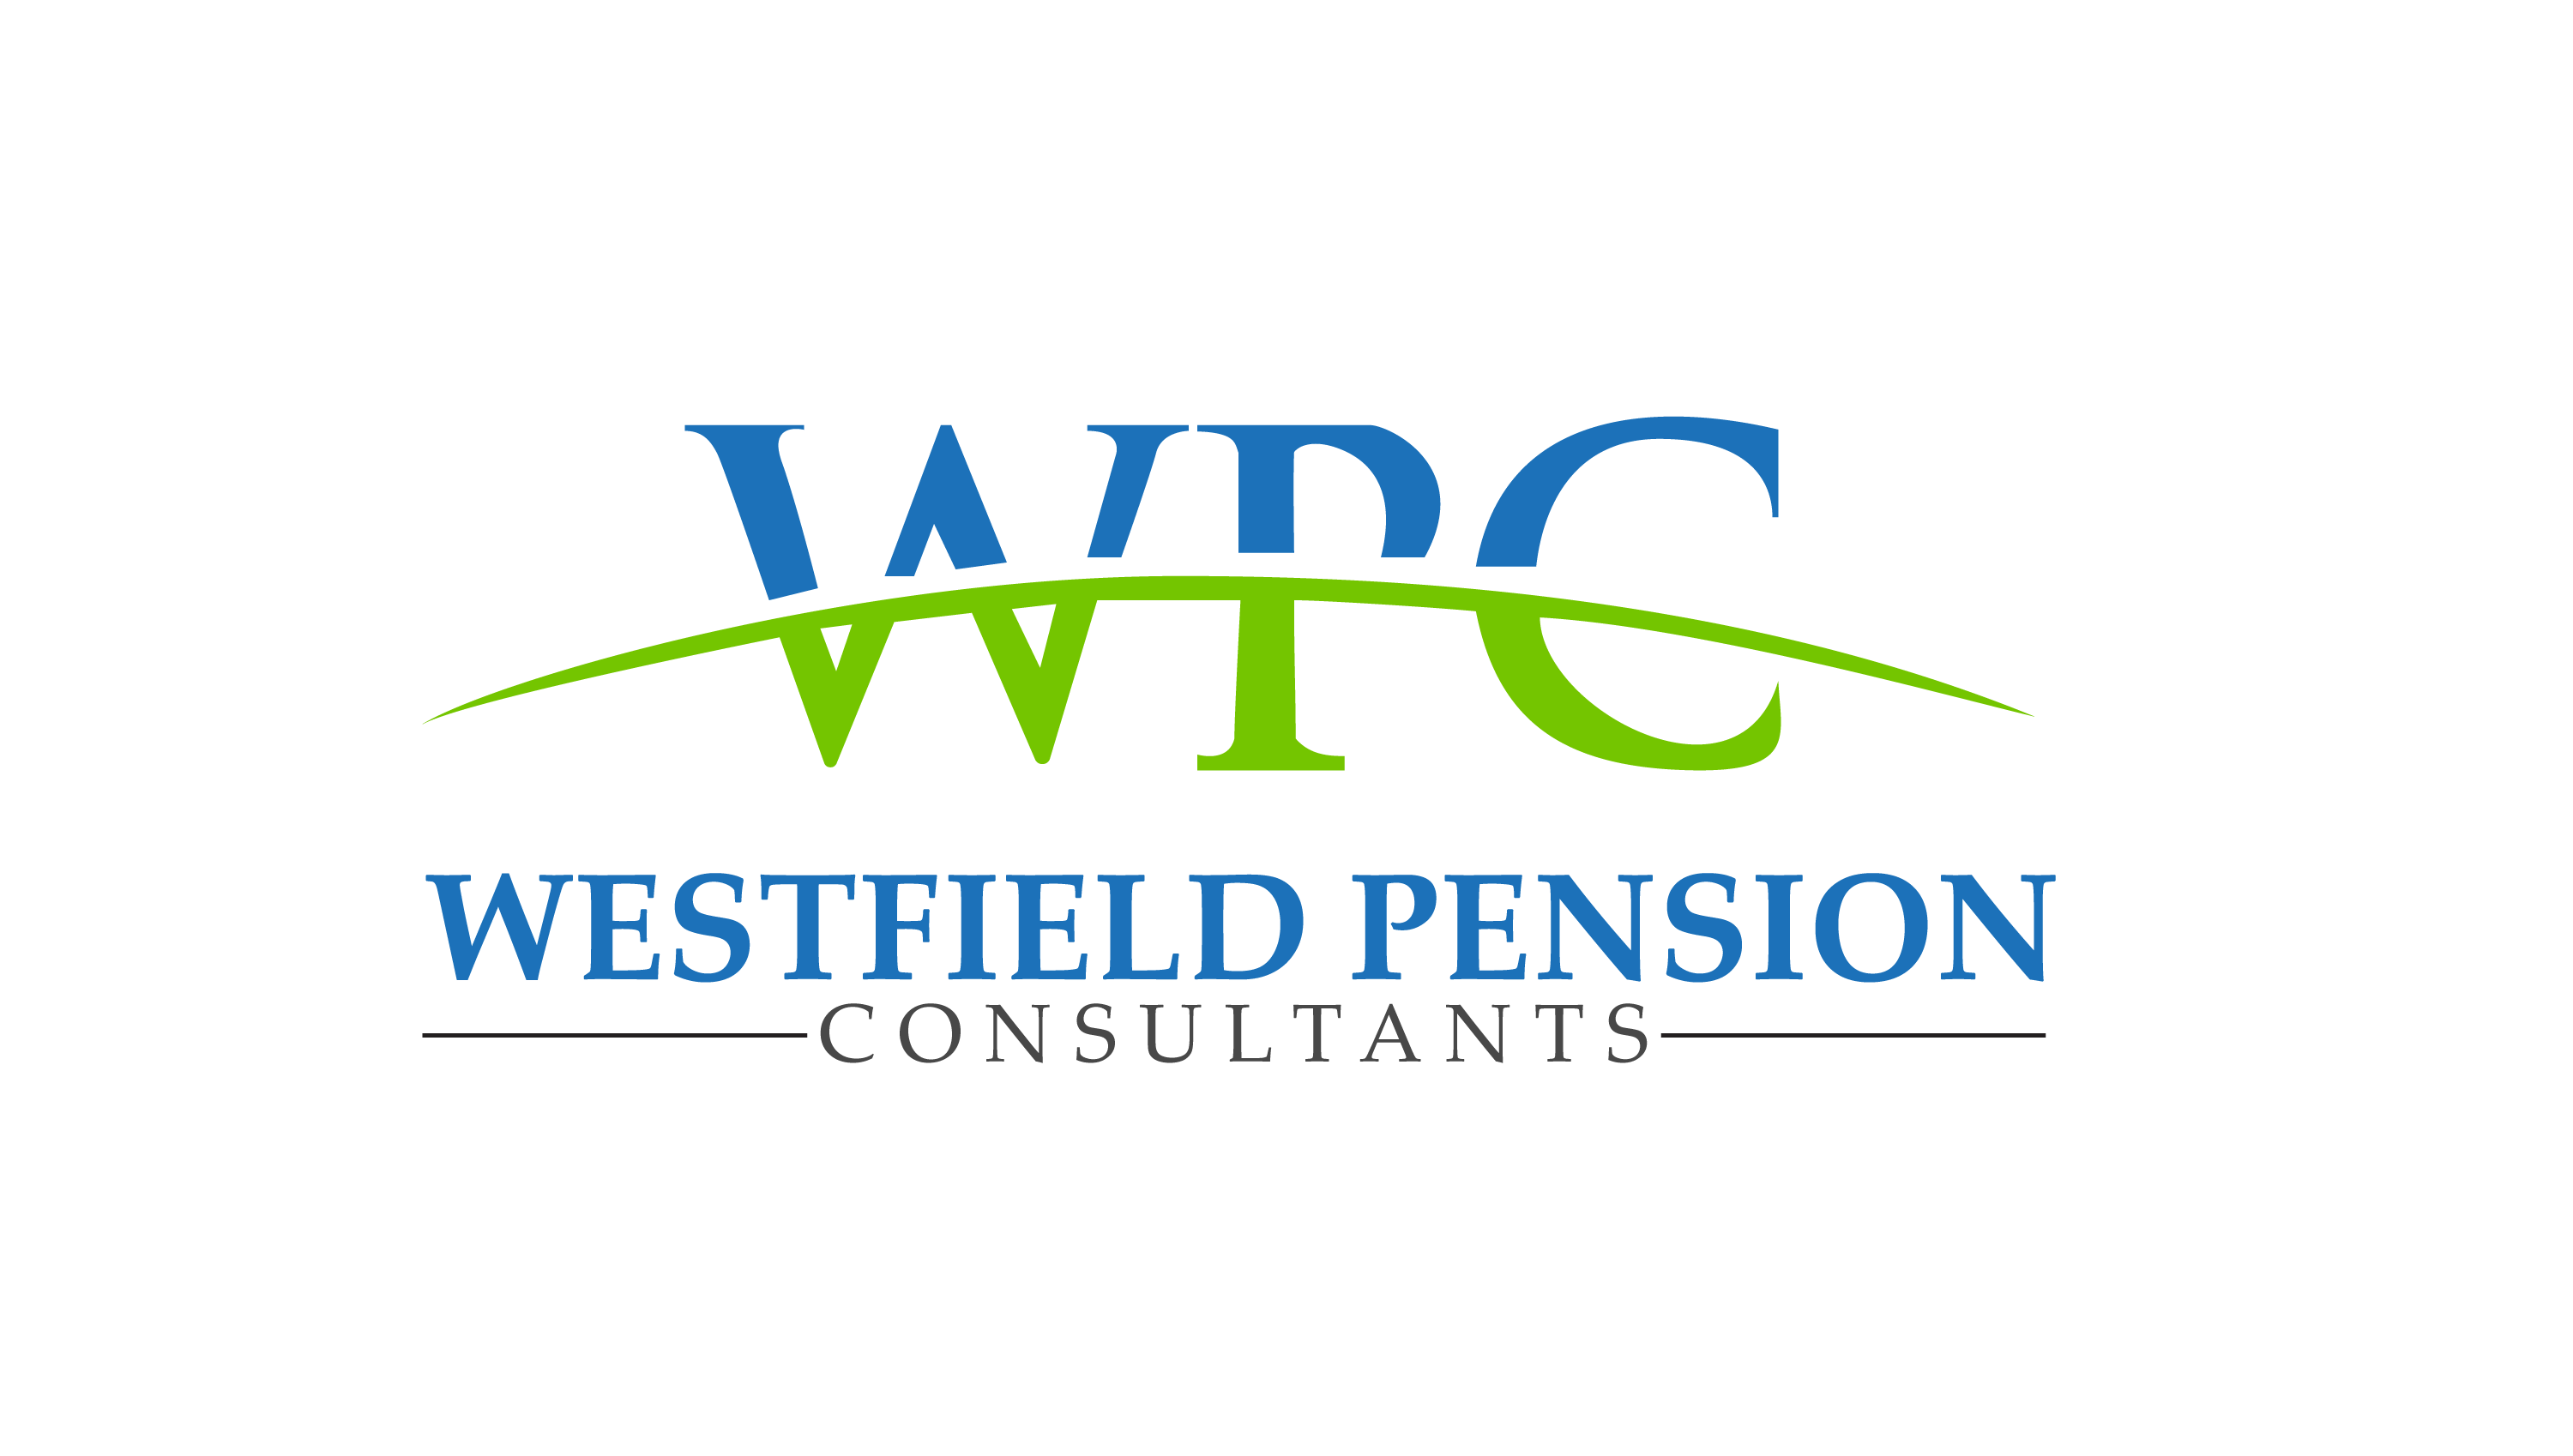 Westfield Pension Consultants